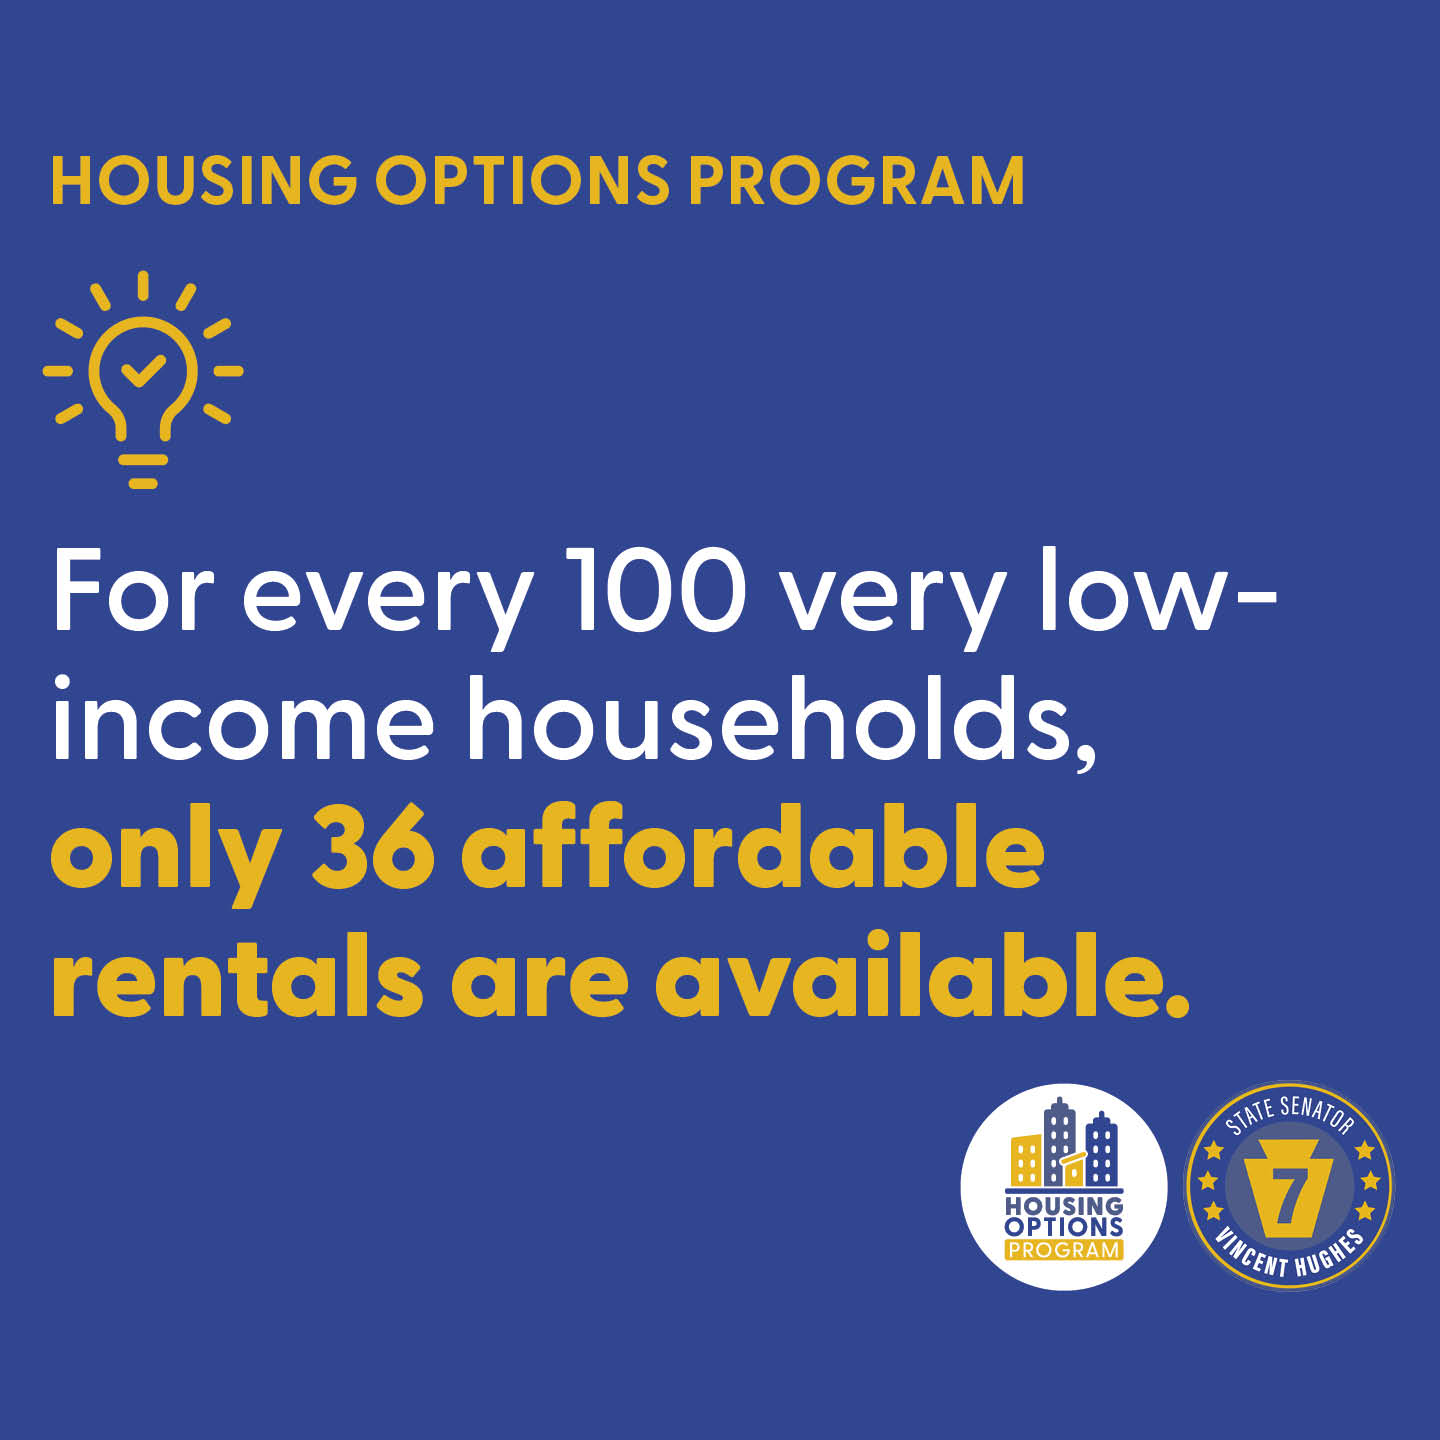 HOUSING OPTIONS PROGRAM - For every 100 very low-income households, only 36 affordable rentals are available.